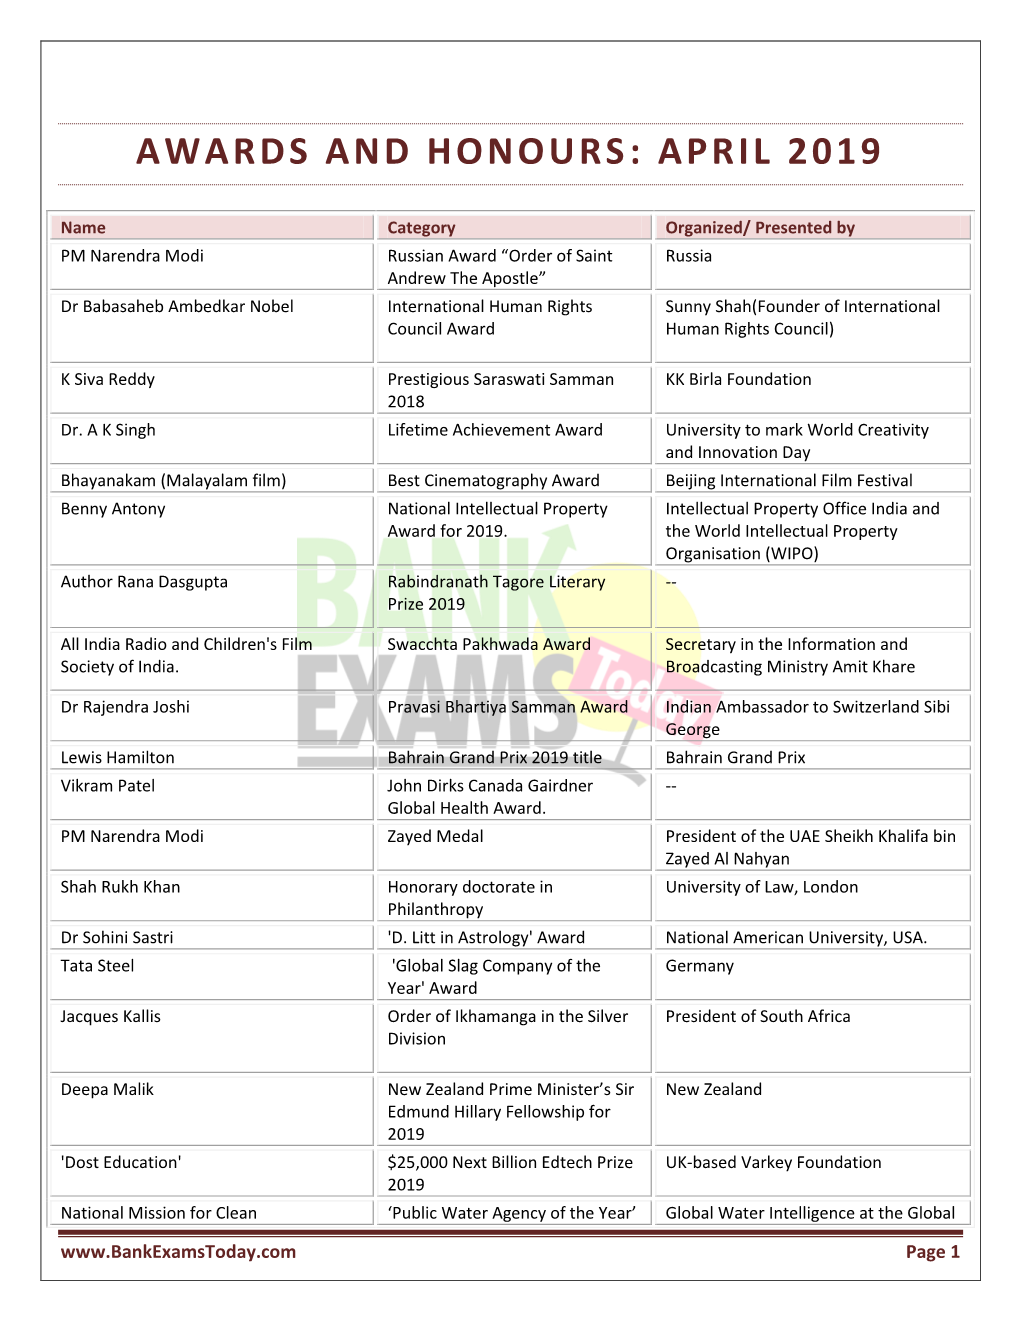 Awards and Honours: April 2019